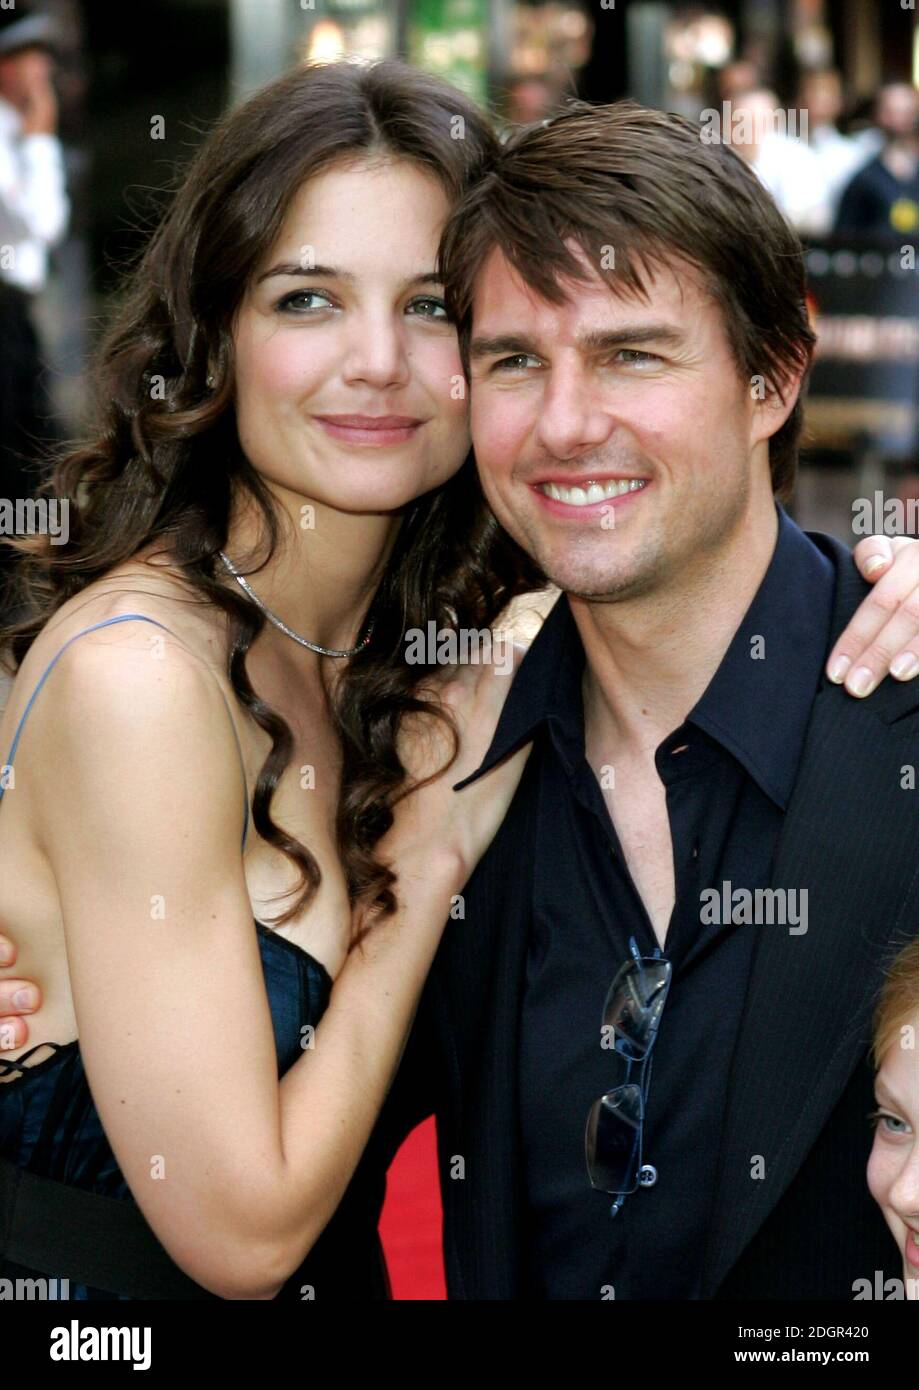 Tom Cruise and Katie Holmes arriving at the UK Premiere of War of the Worlds, Leicester Square, London. Doug Peters/allactiondigital.com  Stock Photo